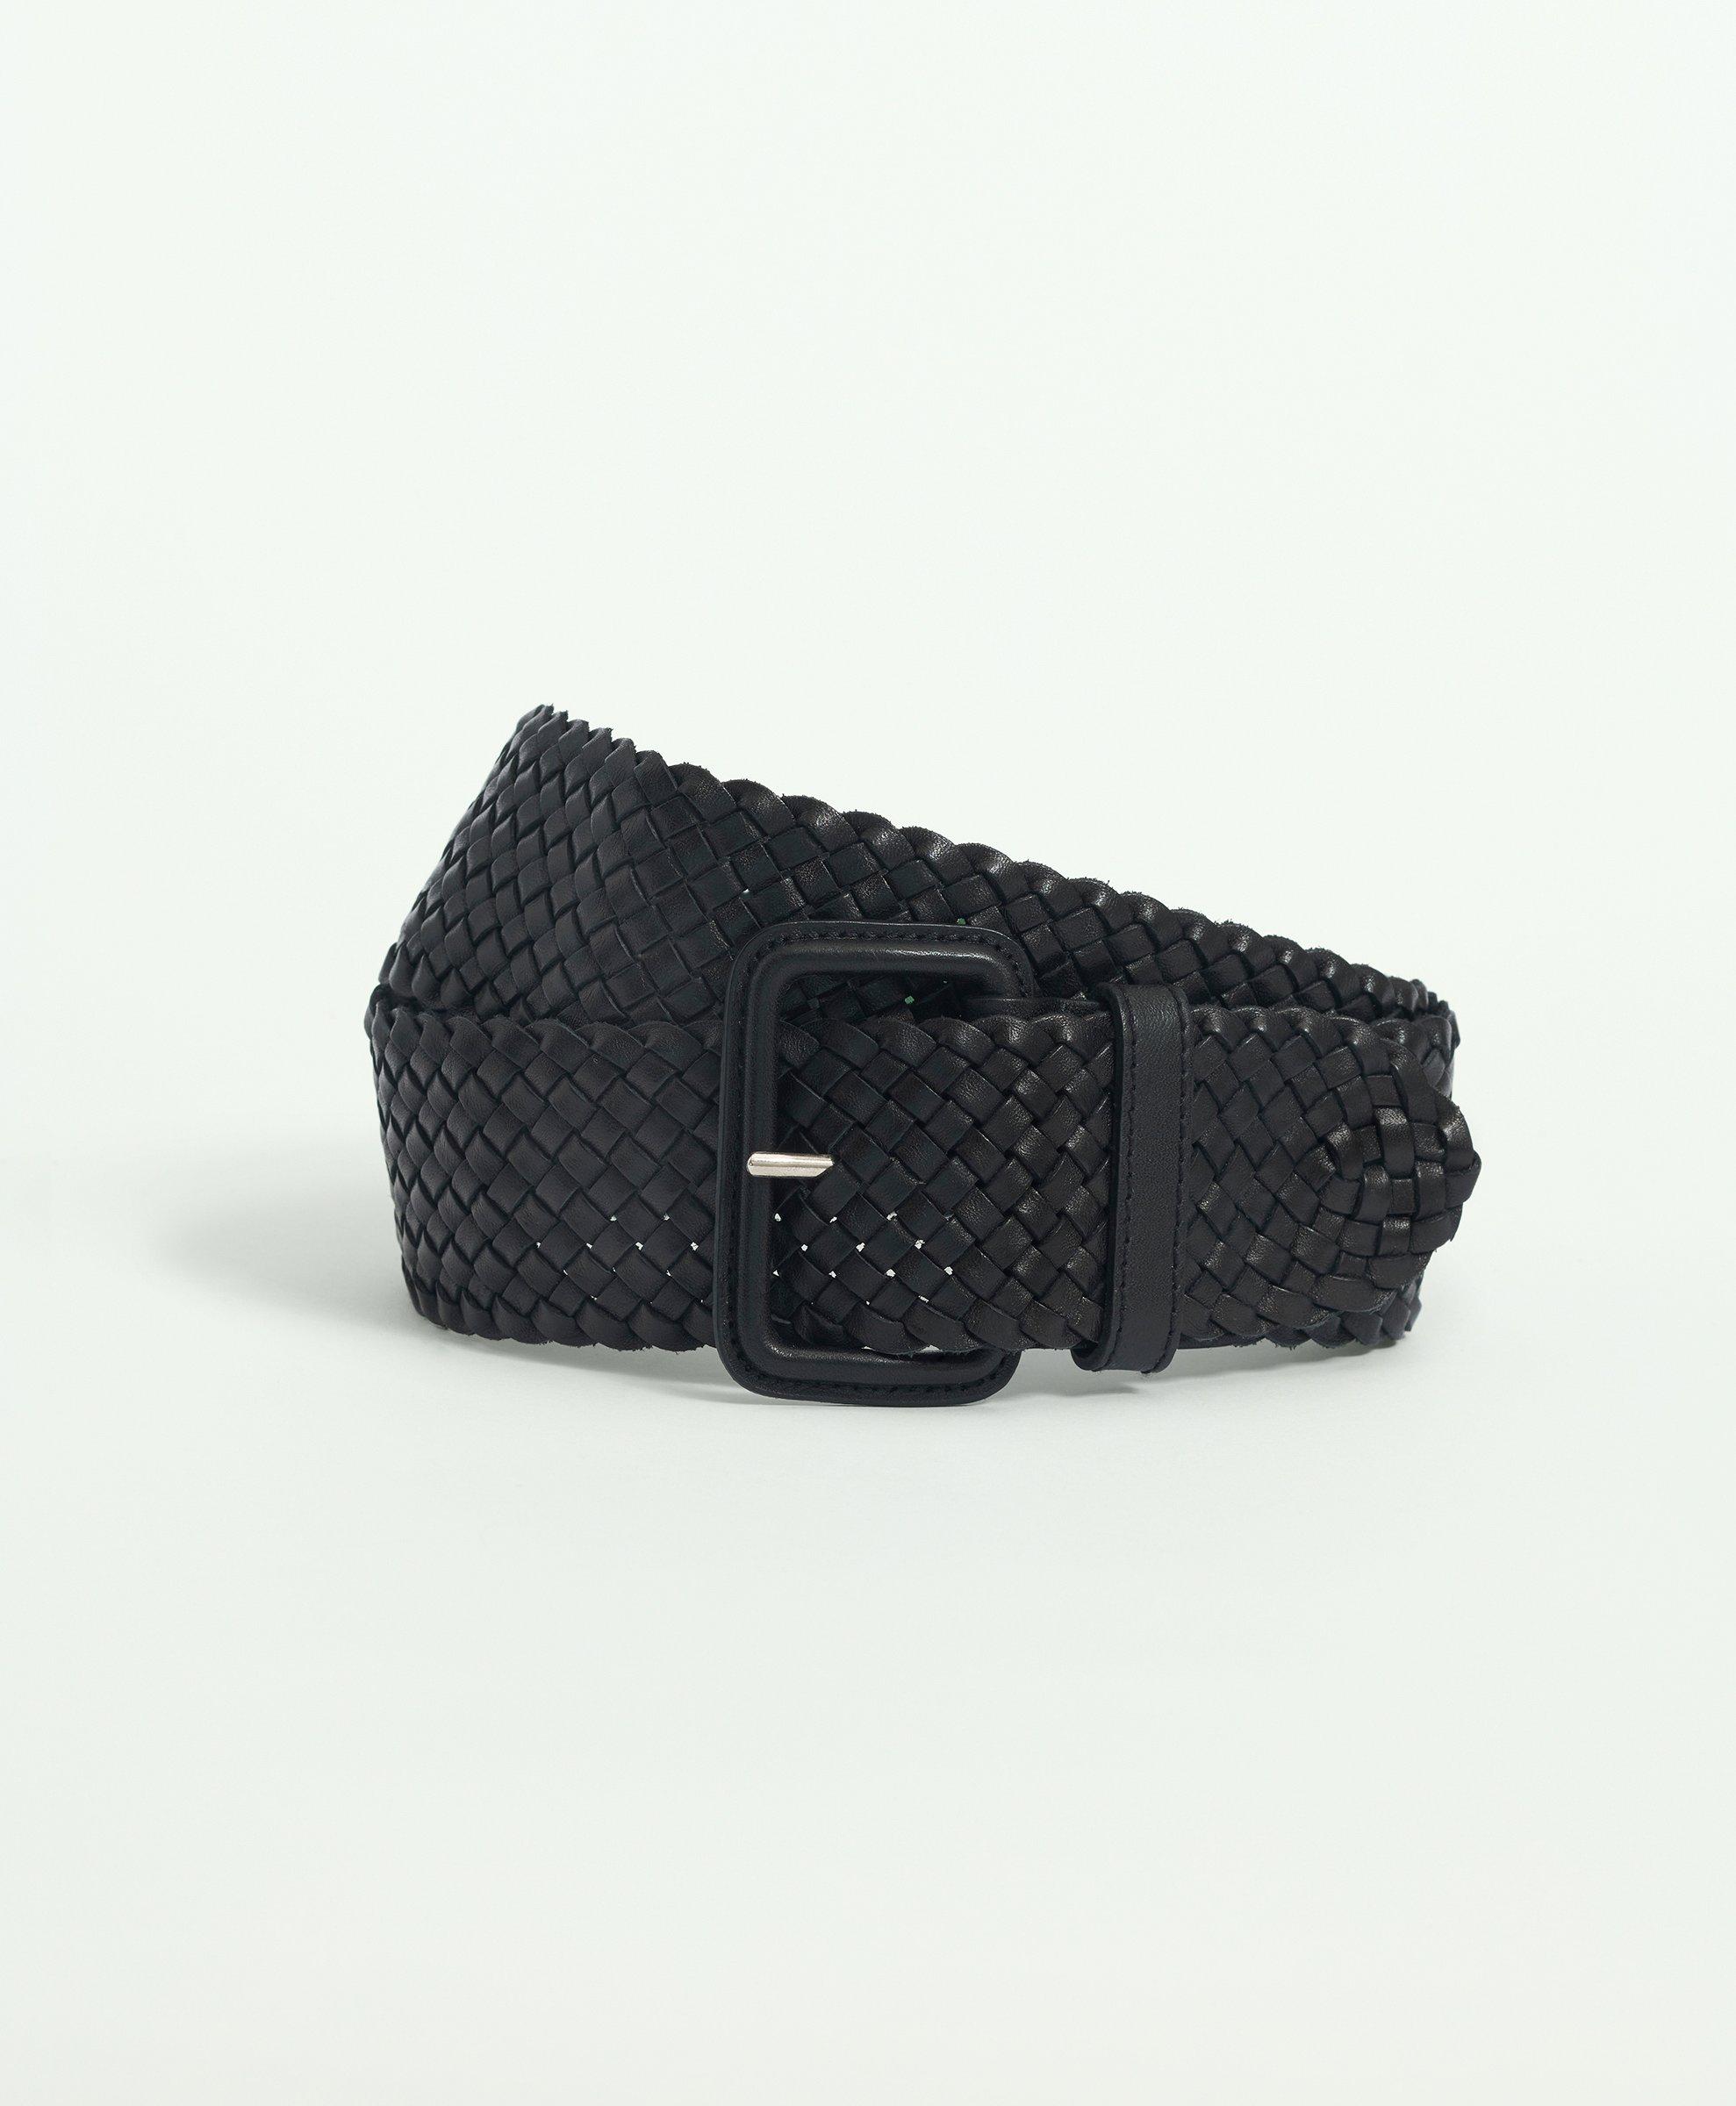 Classic Woven Leather Belt, image 1